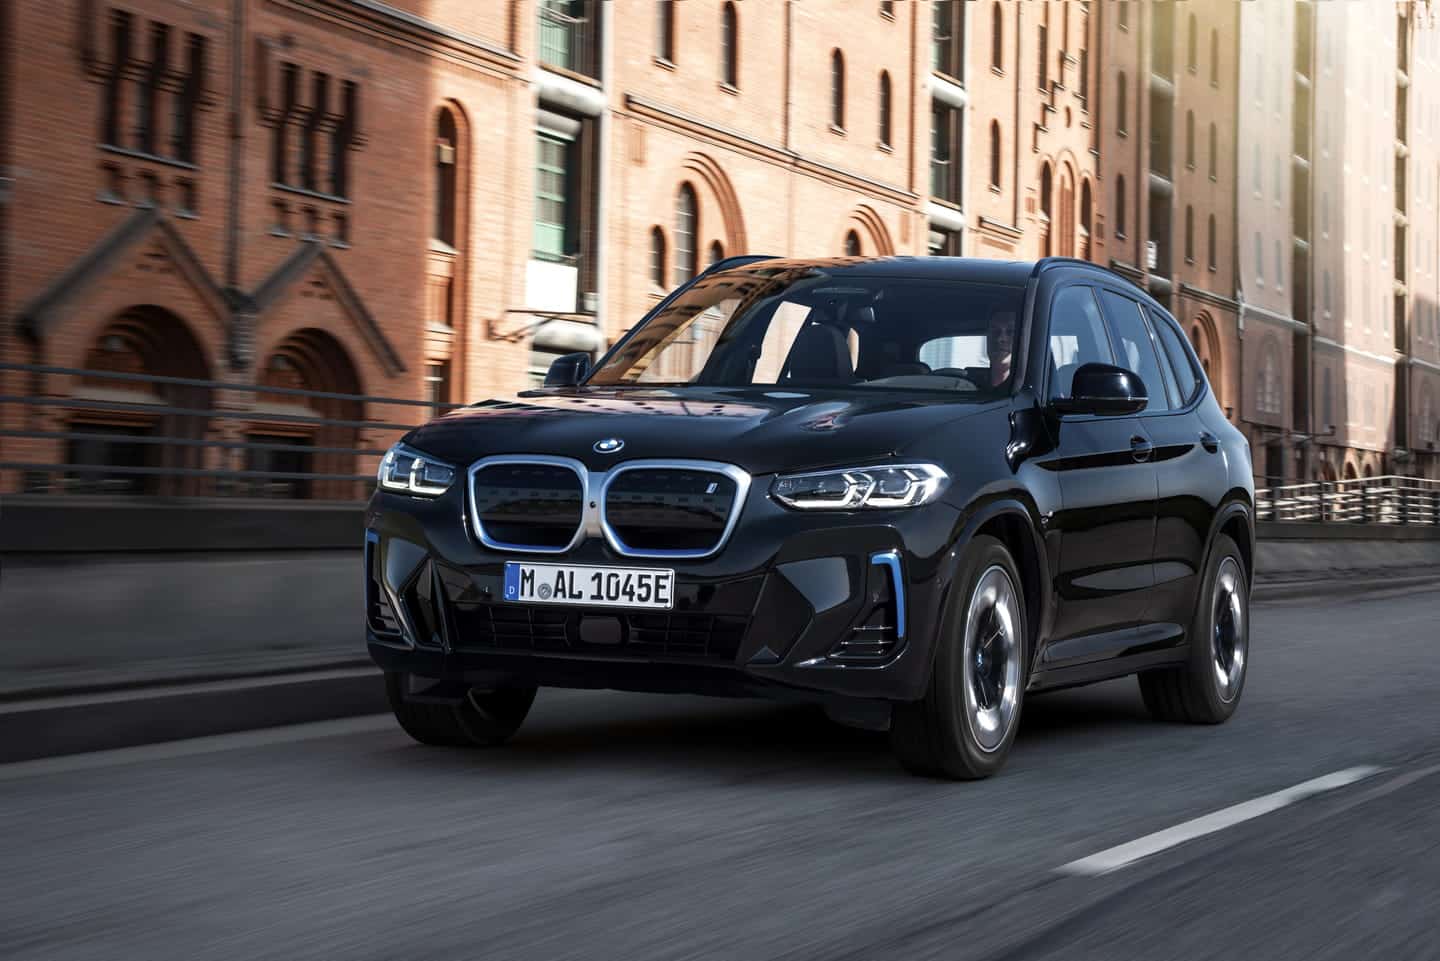 BMW iX3: the brand’s first 100% electric SUV